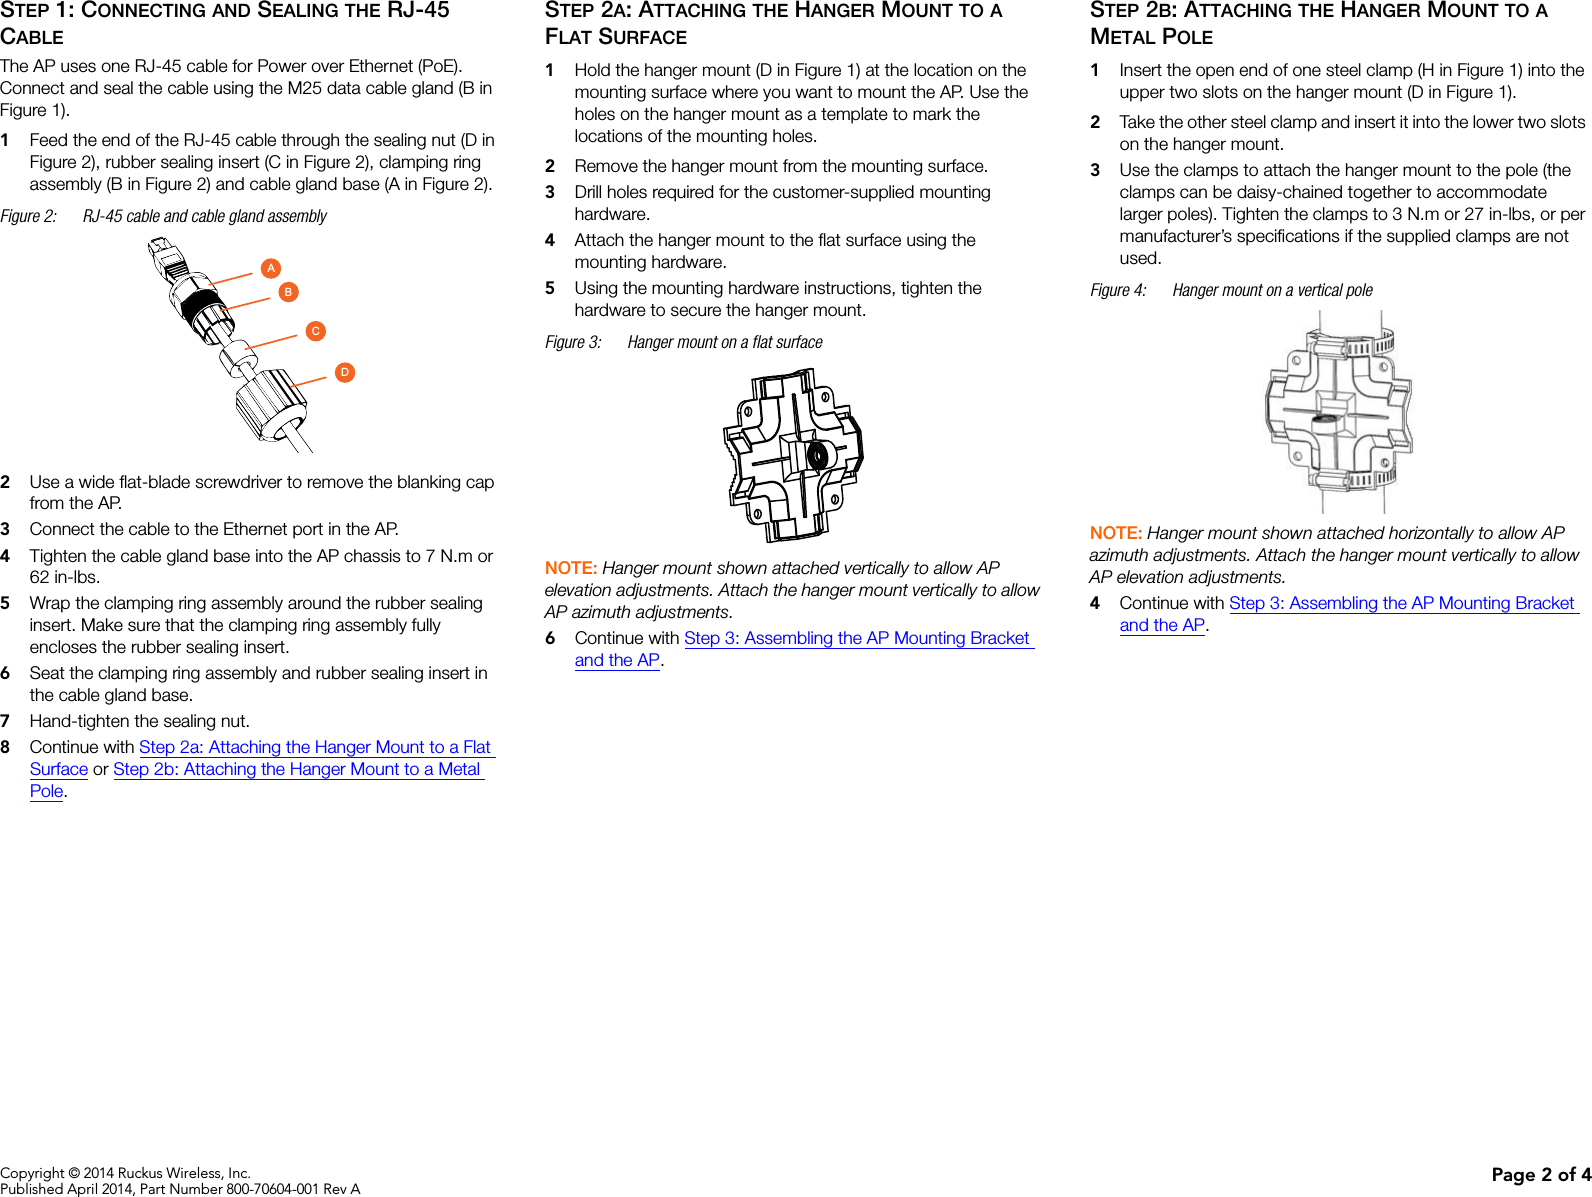 Copyright © 2014 Ruckus Wireless, Inc.Published April 2014, Part Number 800-70604-001 Rev A Page 2 of 4STEP 1: CONNECTING AND SEALING THE RJ-45 CABLEThe AP uses one RJ-45 cable for Power over Ethernet (PoE). Connect and seal the cable using the M25 data cable gland (B in Figure 1).1Feed the end of the RJ-45 cable through the sealing nut (D in Figure 2), rubber sealing insert (C in Figure 2), clamping ring assembly (B in Figure 2) and cable gland base (A in Figure 2).Figure 2: RJ-45 cable and cable gland assembly2Use a wide flat-blade screwdriver to remove the blanking cap from the AP.3Connect the cable to the Ethernet port in the AP. 4Tighten the cable gland base into the AP chassis to 7 N.m or 62 in-lbs.5Wrap the clamping ring assembly around the rubber sealing insert. Make sure that the clamping ring assembly fully encloses the rubber sealing insert.6Seat the clamping ring assembly and rubber sealing insert in the cable gland base.7Hand-tighten the sealing nut. 8Continue with Step 2a: Attaching the Hanger Mount to a Flat Surface or Step 2b: Attaching the Hanger Mount to a Metal Pole.STEP 2A: ATTACHING THE HANGER MOUNT TO A FLAT SURFACE1Hold the hanger mount (D in Figure 1) at the location on the mounting surface where you want to mount the AP. Use the holes on the hanger mount as a template to mark the locations of the mounting holes.2Remove the hanger mount from the mounting surface.3Drill holes required for the customer-supplied mounting hardware.4Attach the hanger mount to the flat surface using the mounting hardware. 5Using the mounting hardware instructions, tighten the hardware to secure the hanger mount.Figure 3: Hanger mount on a flat surface NOTE: Hanger mount shown attached vertically to allow AP elevation adjustments. Attach the hanger mount vertically to allow AP azimuth adjustments.6Continue with Step 3: Assembling the AP Mounting Bracket and the AP.STEP 2B: ATTACHING THE HANGER MOUNT TO A METAL POLE1Insert the open end of one steel clamp (H in Figure 1) into the upper two slots on the hanger mount (D in Figure 1).2Take the other steel clamp and insert it into the lower two slots on the hanger mount.3Use the clamps to attach the hanger mount to the pole (the clamps can be daisy-chained together to accommodate larger poles). Tighten the clamps to 3 N.m or 27 in-lbs, or per manufacturer’s specifications if the supplied clamps are not used.Figure 4: Hanger mount on a vertical poleNOTE: Hanger mount shown attached horizontally to allow AP azimuth adjustments. Attach the hanger mount vertically to allow AP elevation adjustments.4Continue with Step 3: Assembling the AP Mounting Bracket and the AP.ABCD